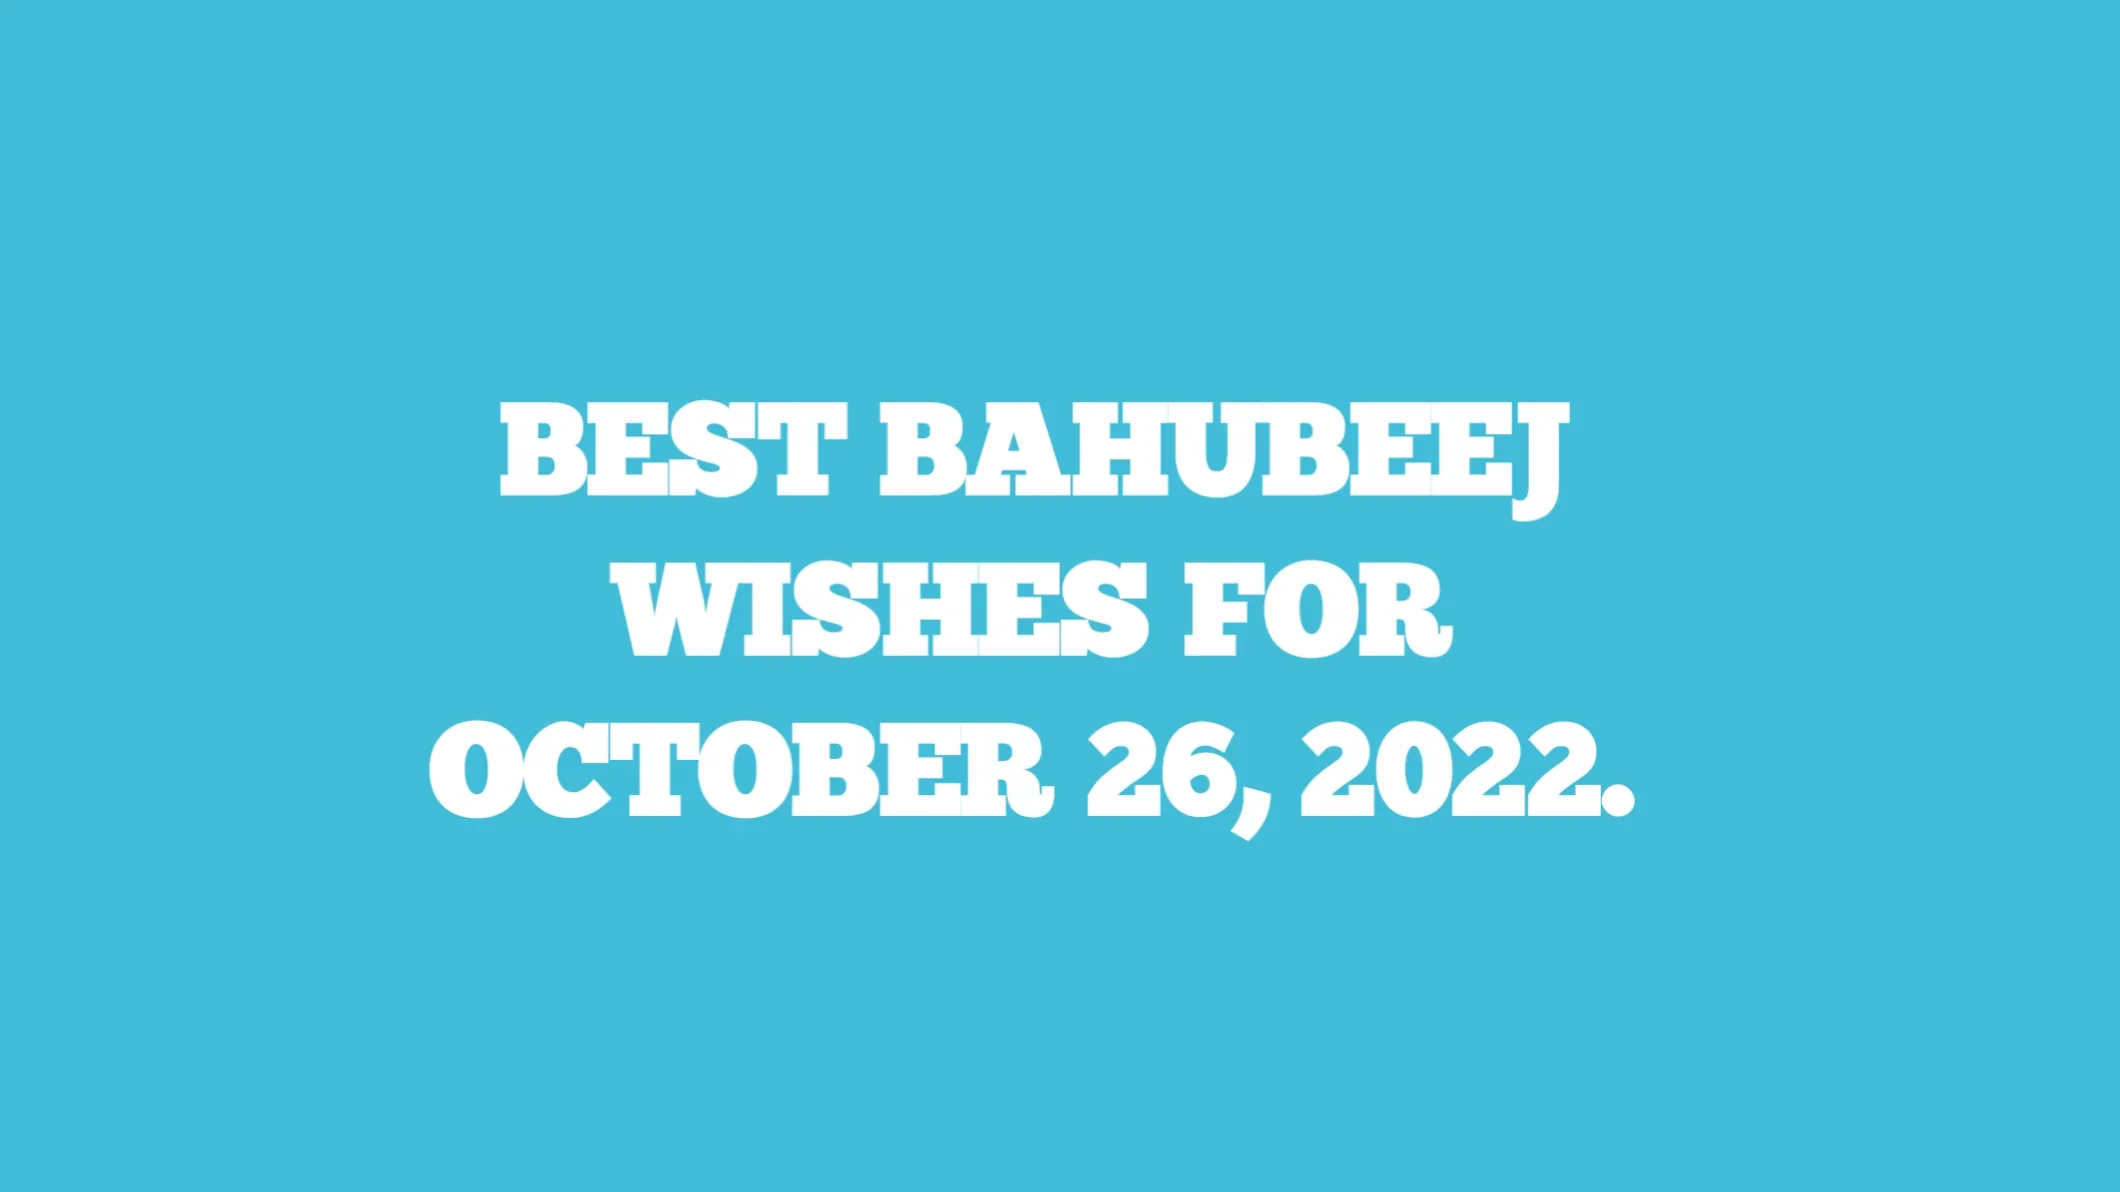 bhaubeej wishes for october 26, 2022